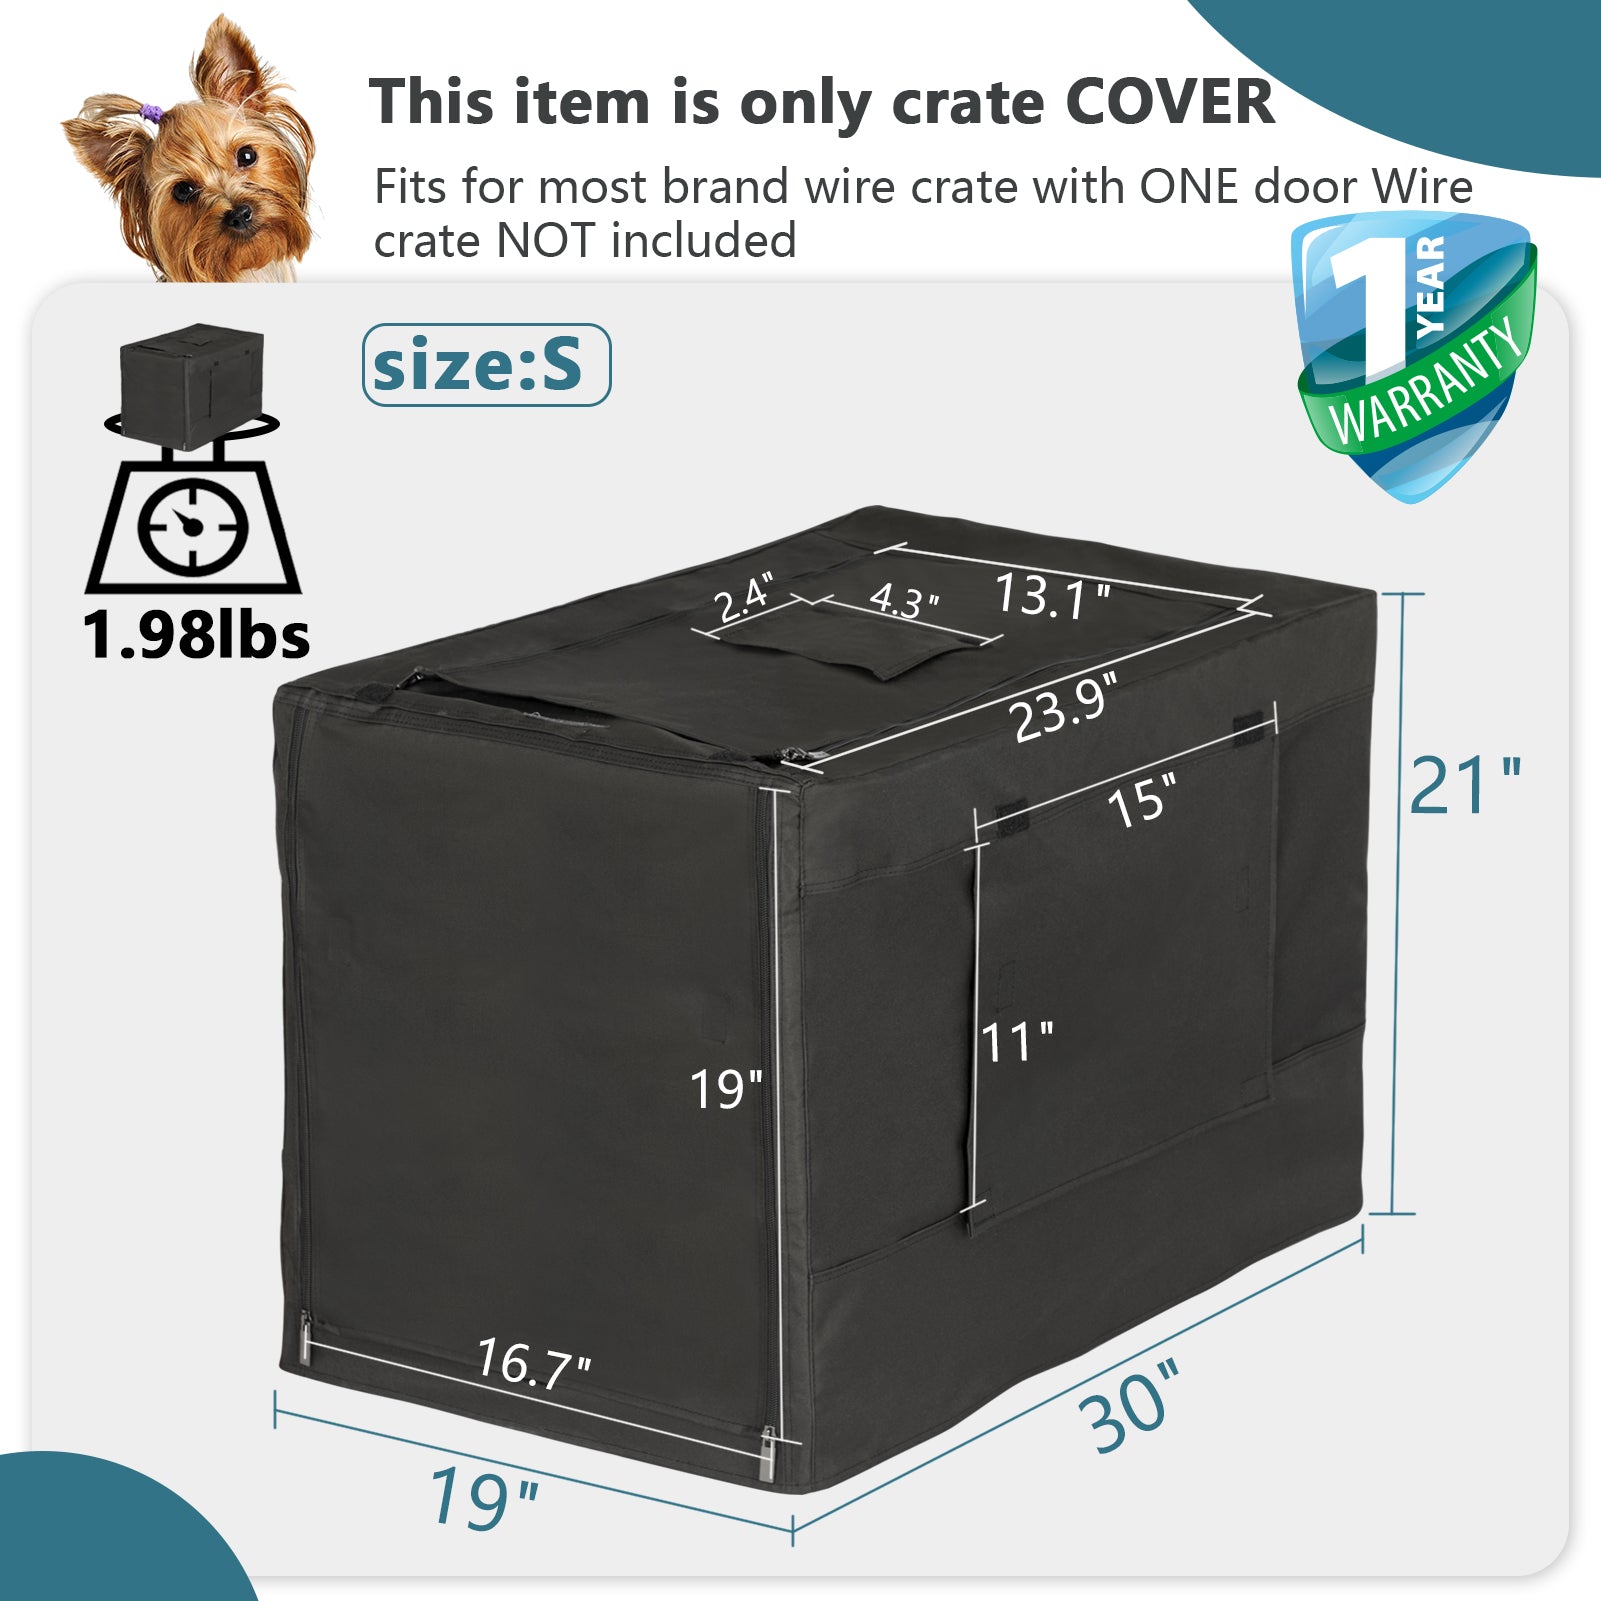 Petsfit-Dog-Crate-Cover-02